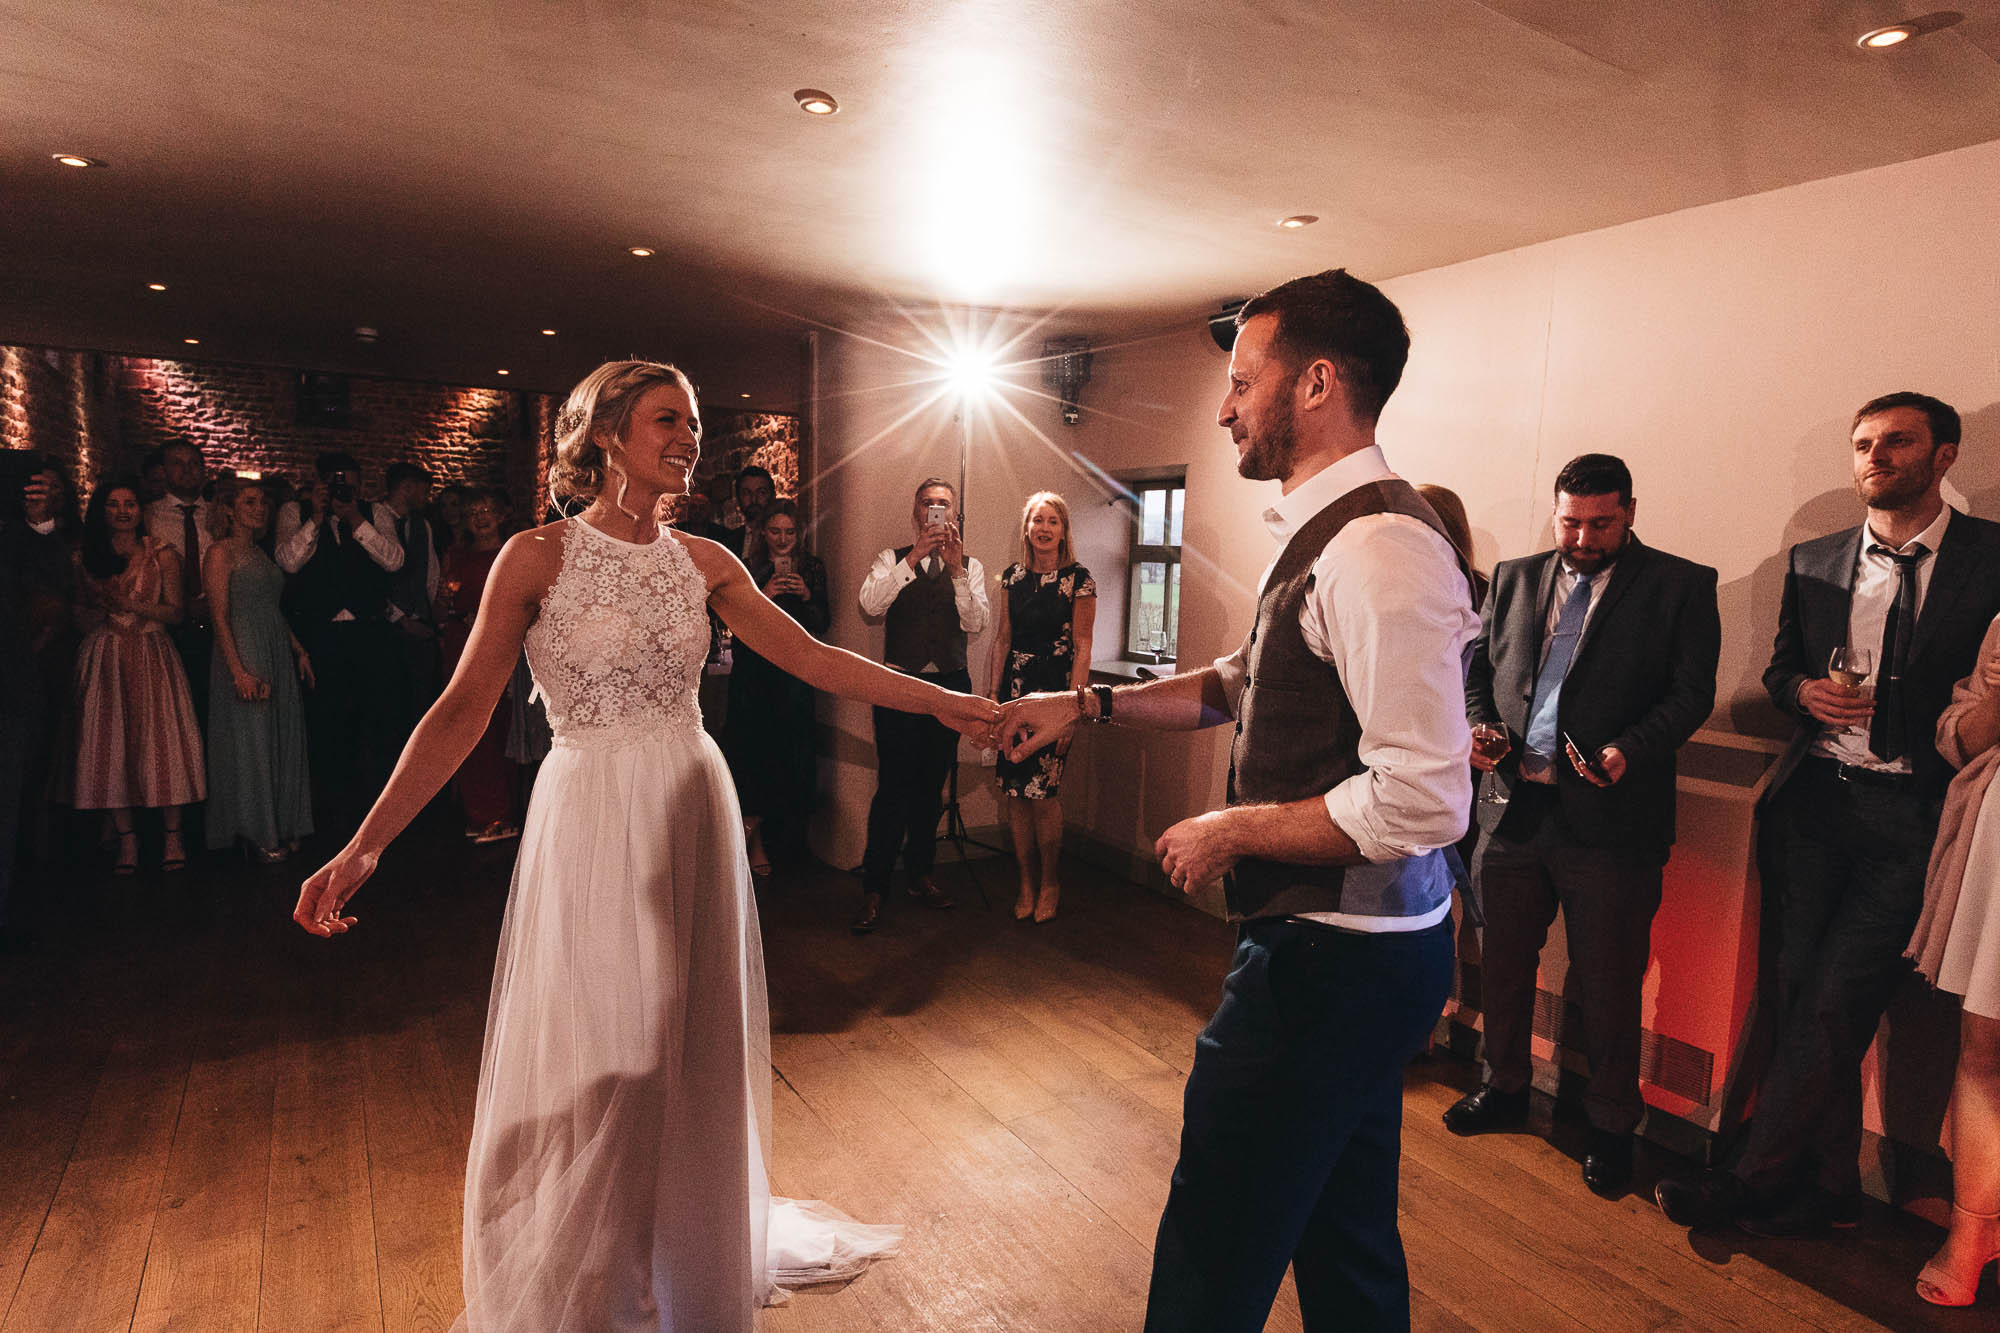 Newlyweds share their first dance surrounded by happy wedding guests